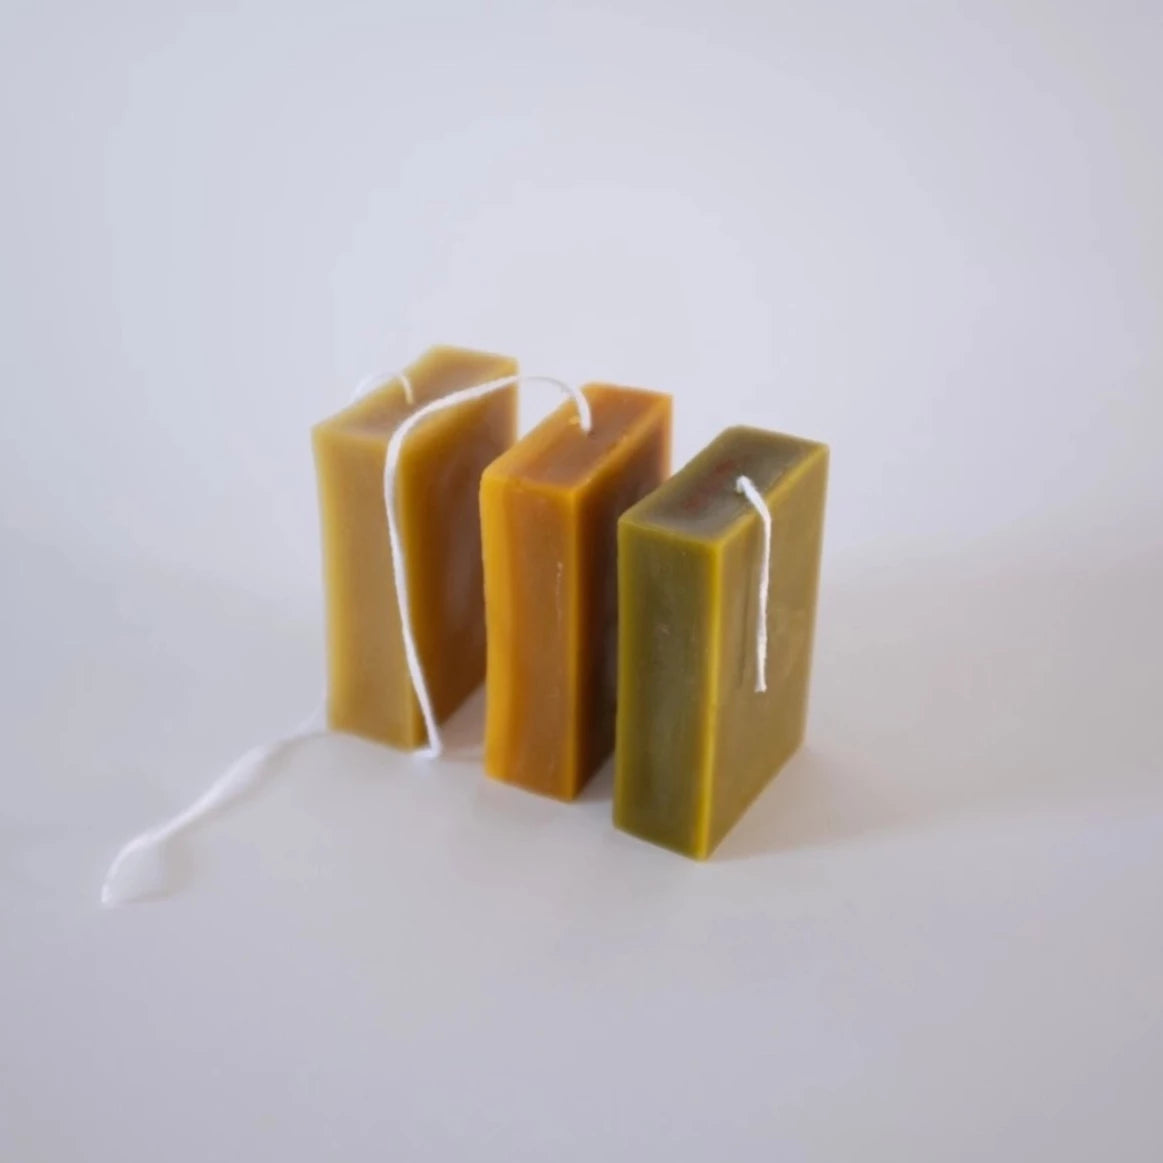 Block candles (set of 3) by Copito